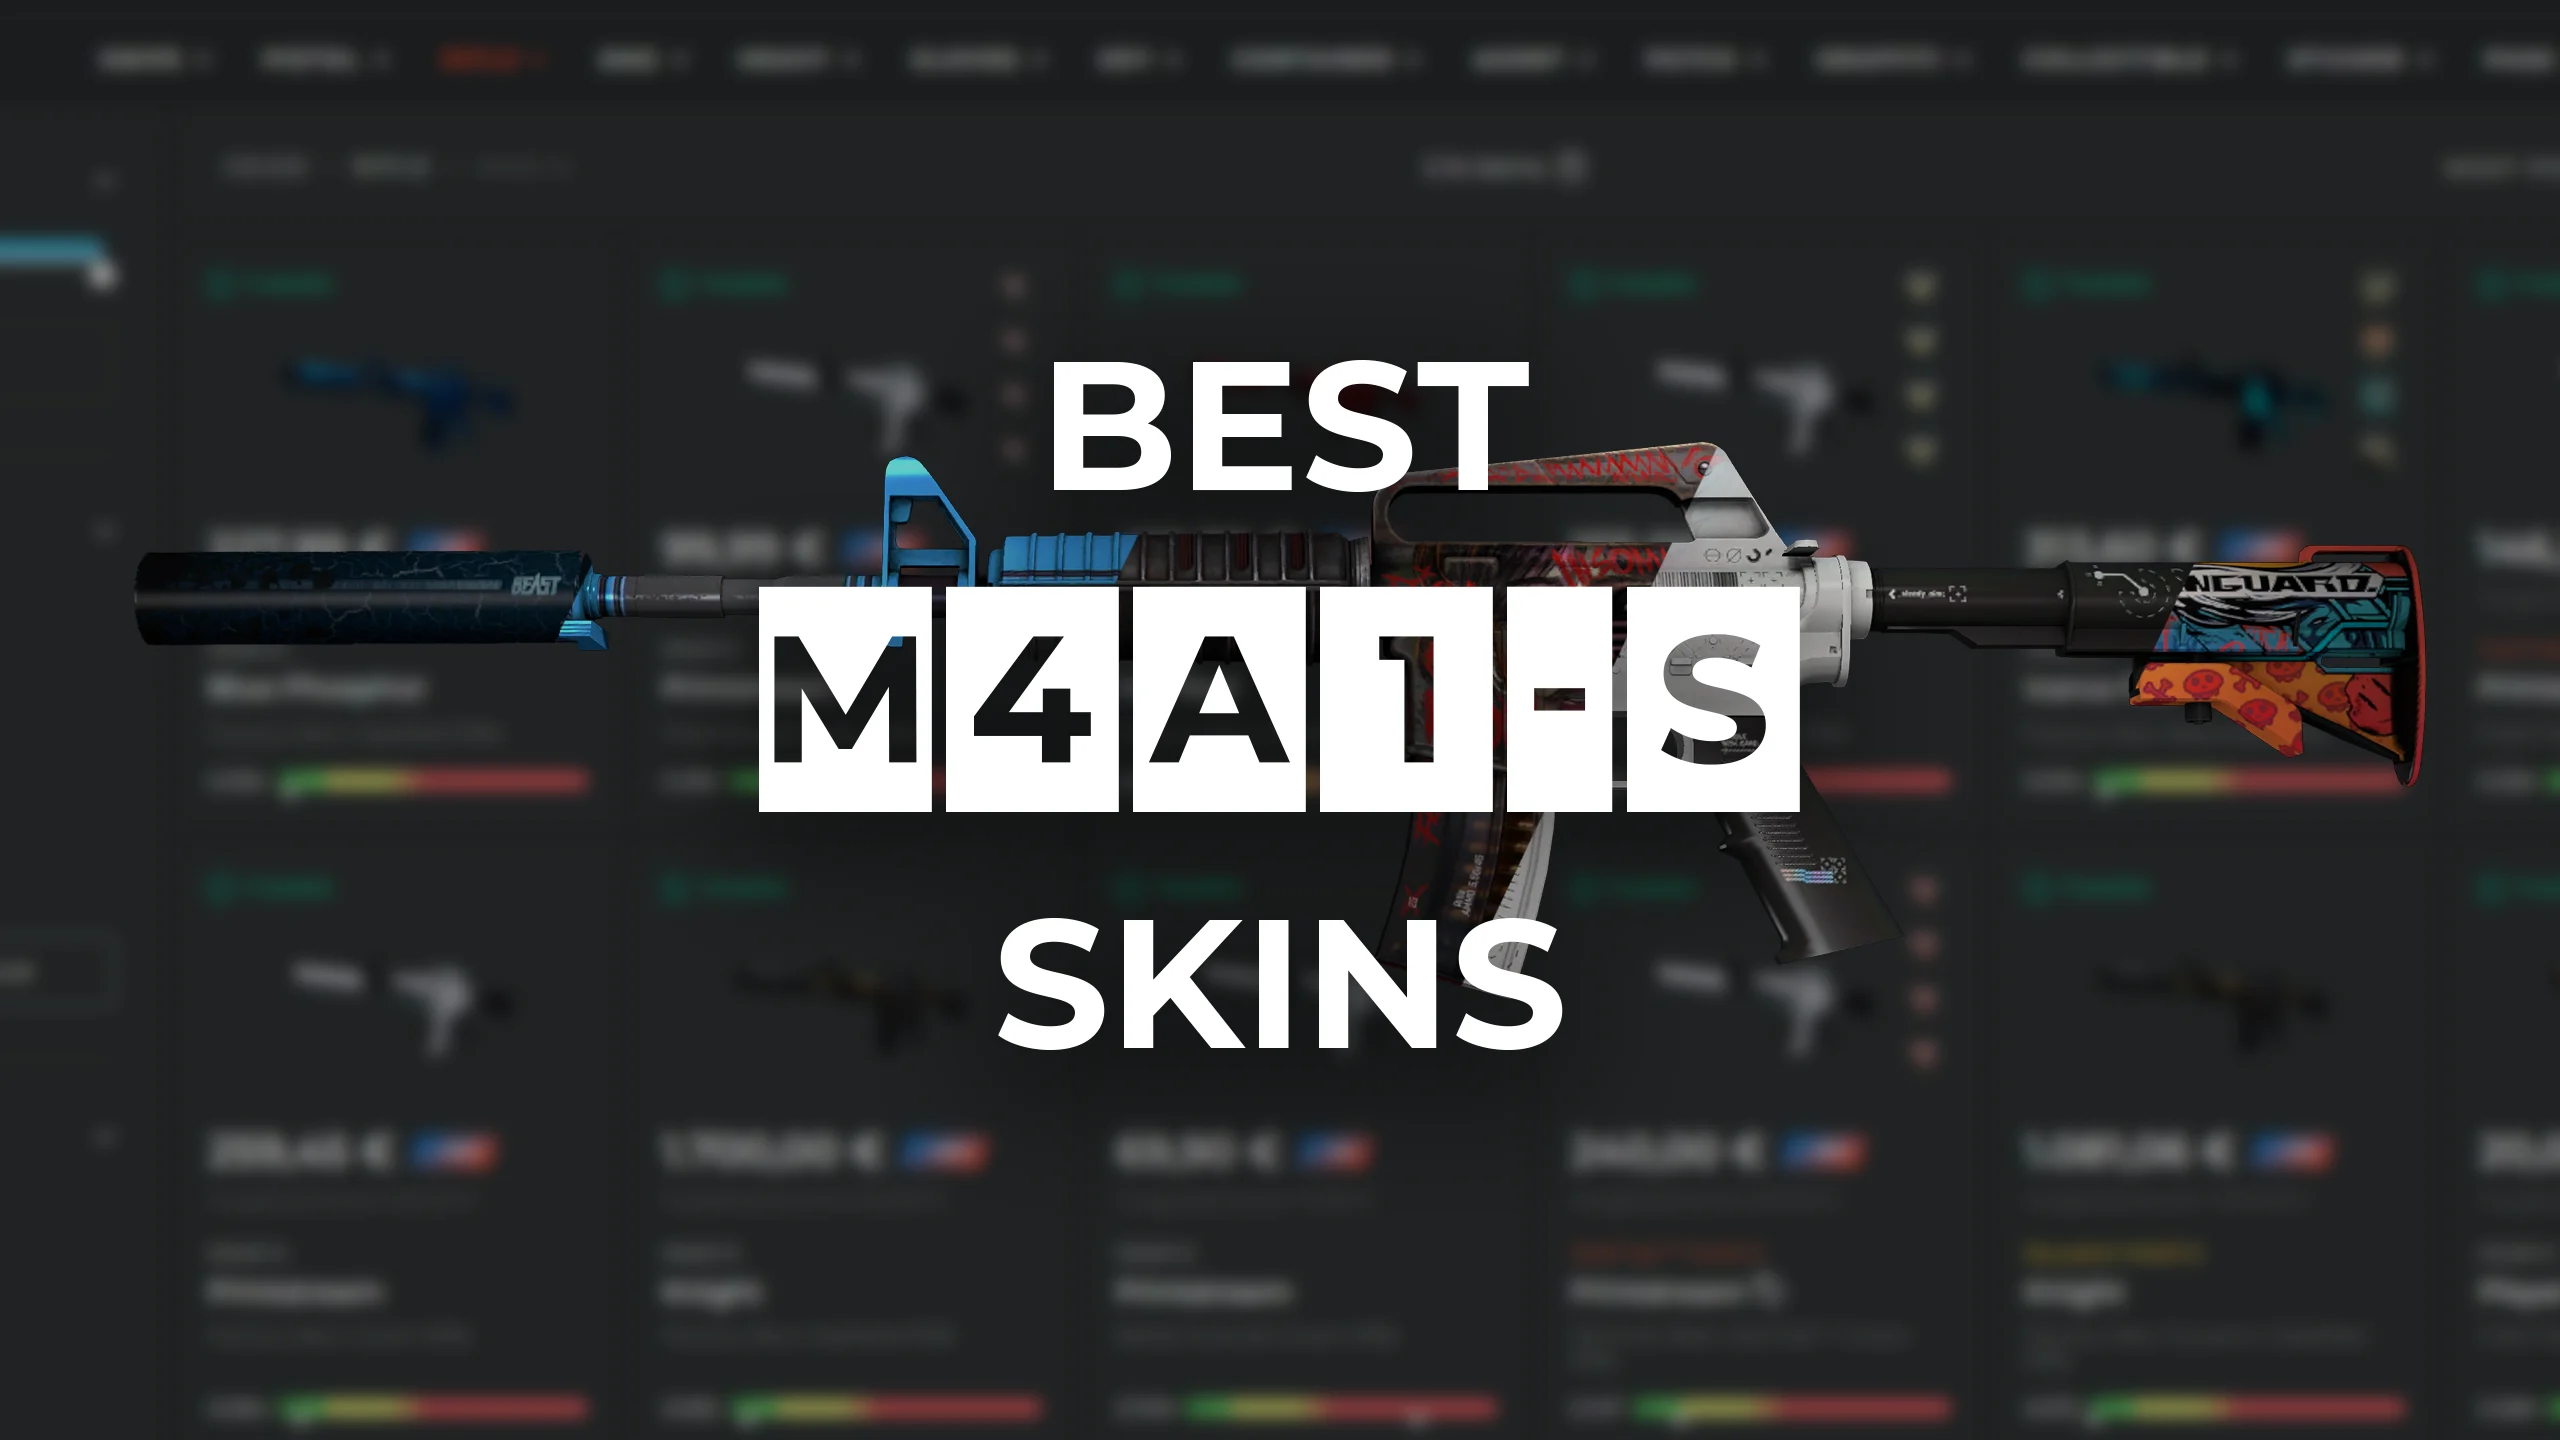 The Best M4A1-S Skins of 2022